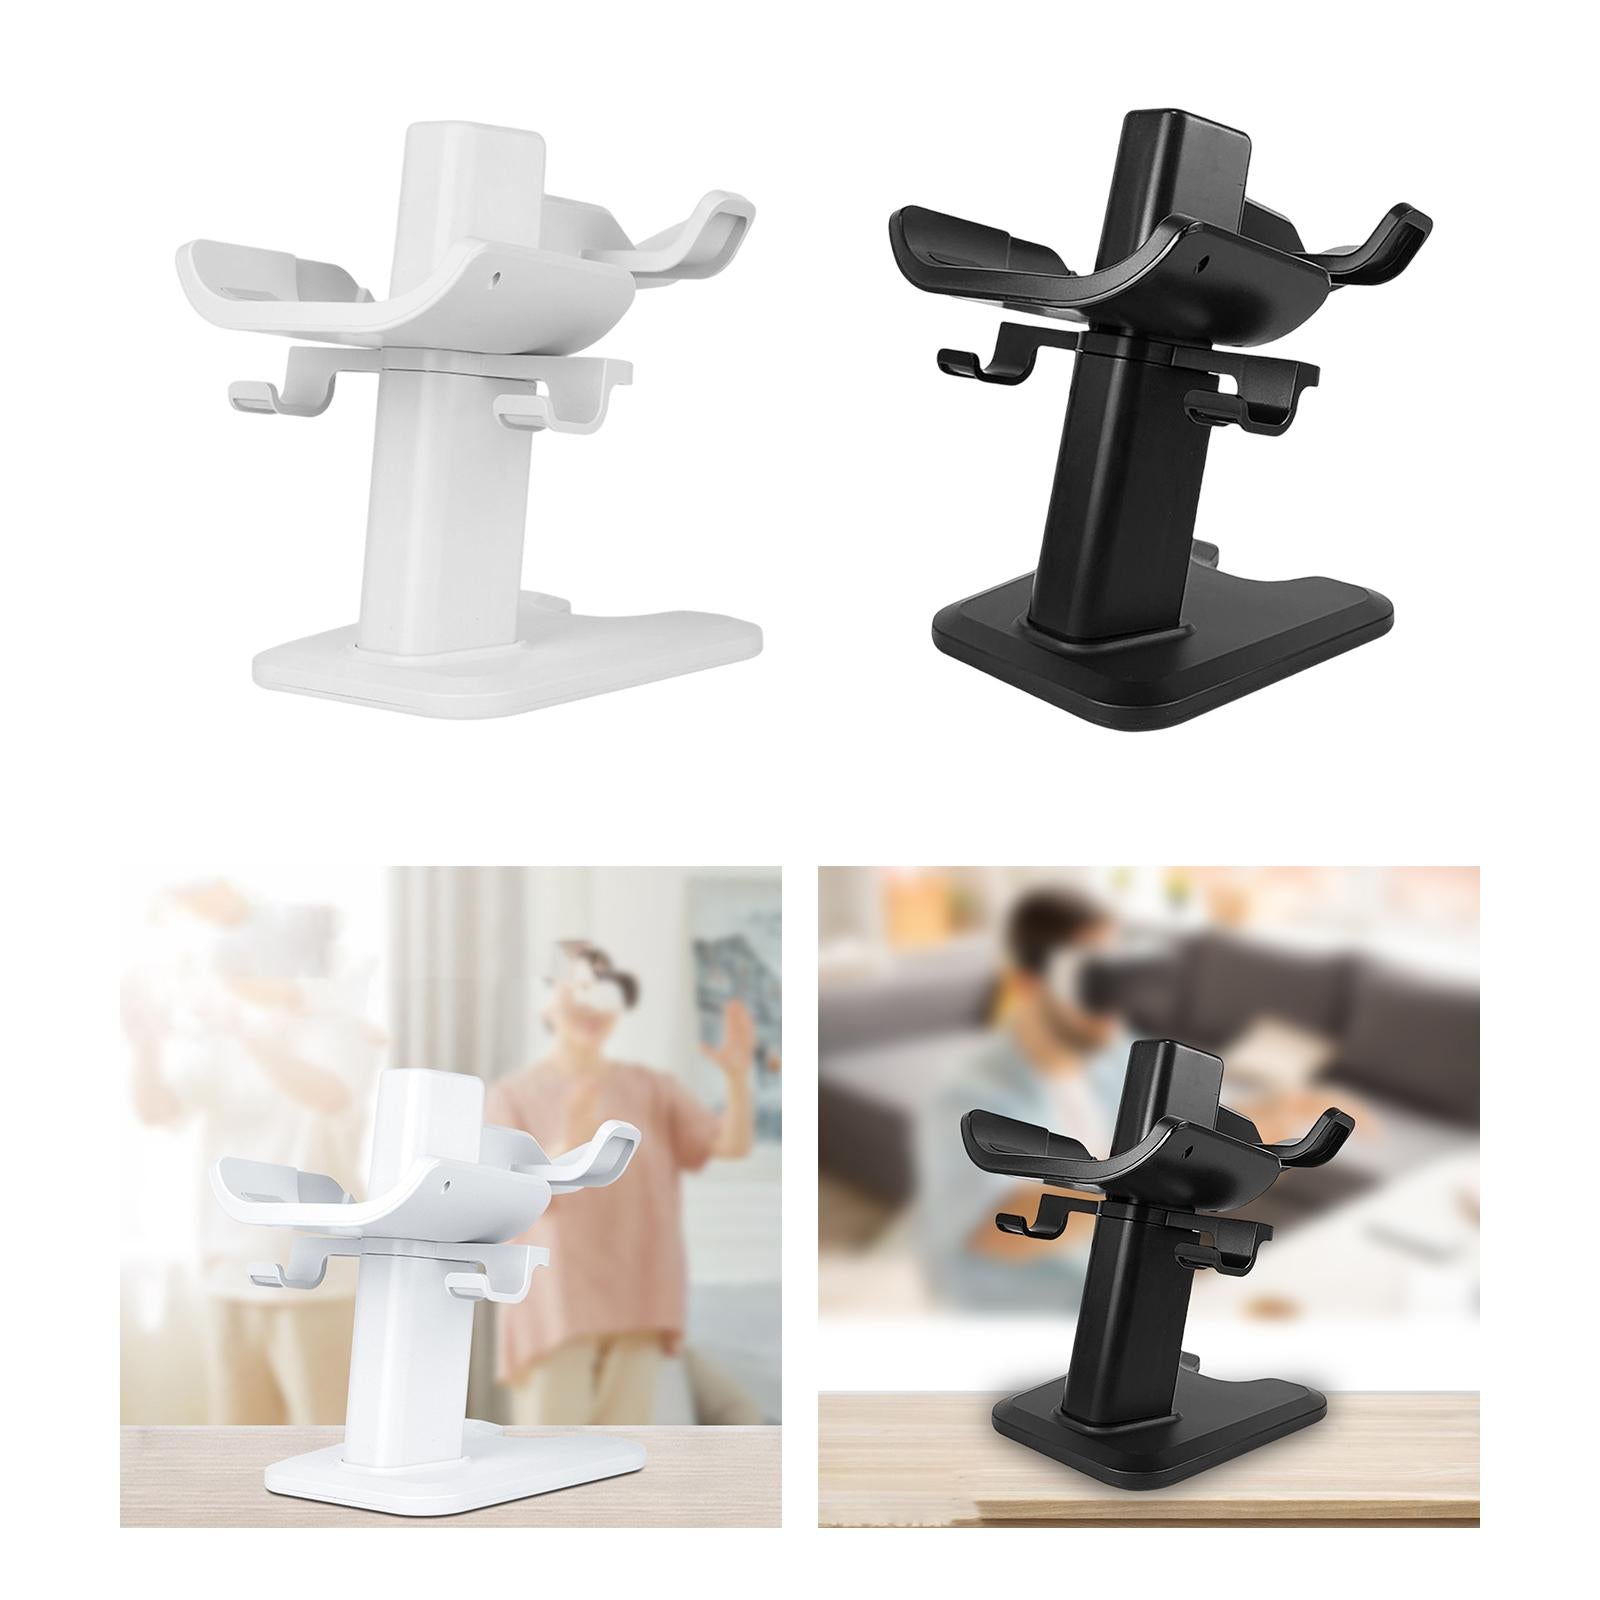 VR Stand Protection Controller Mount Station Storage Stand Stable for Quest2 White